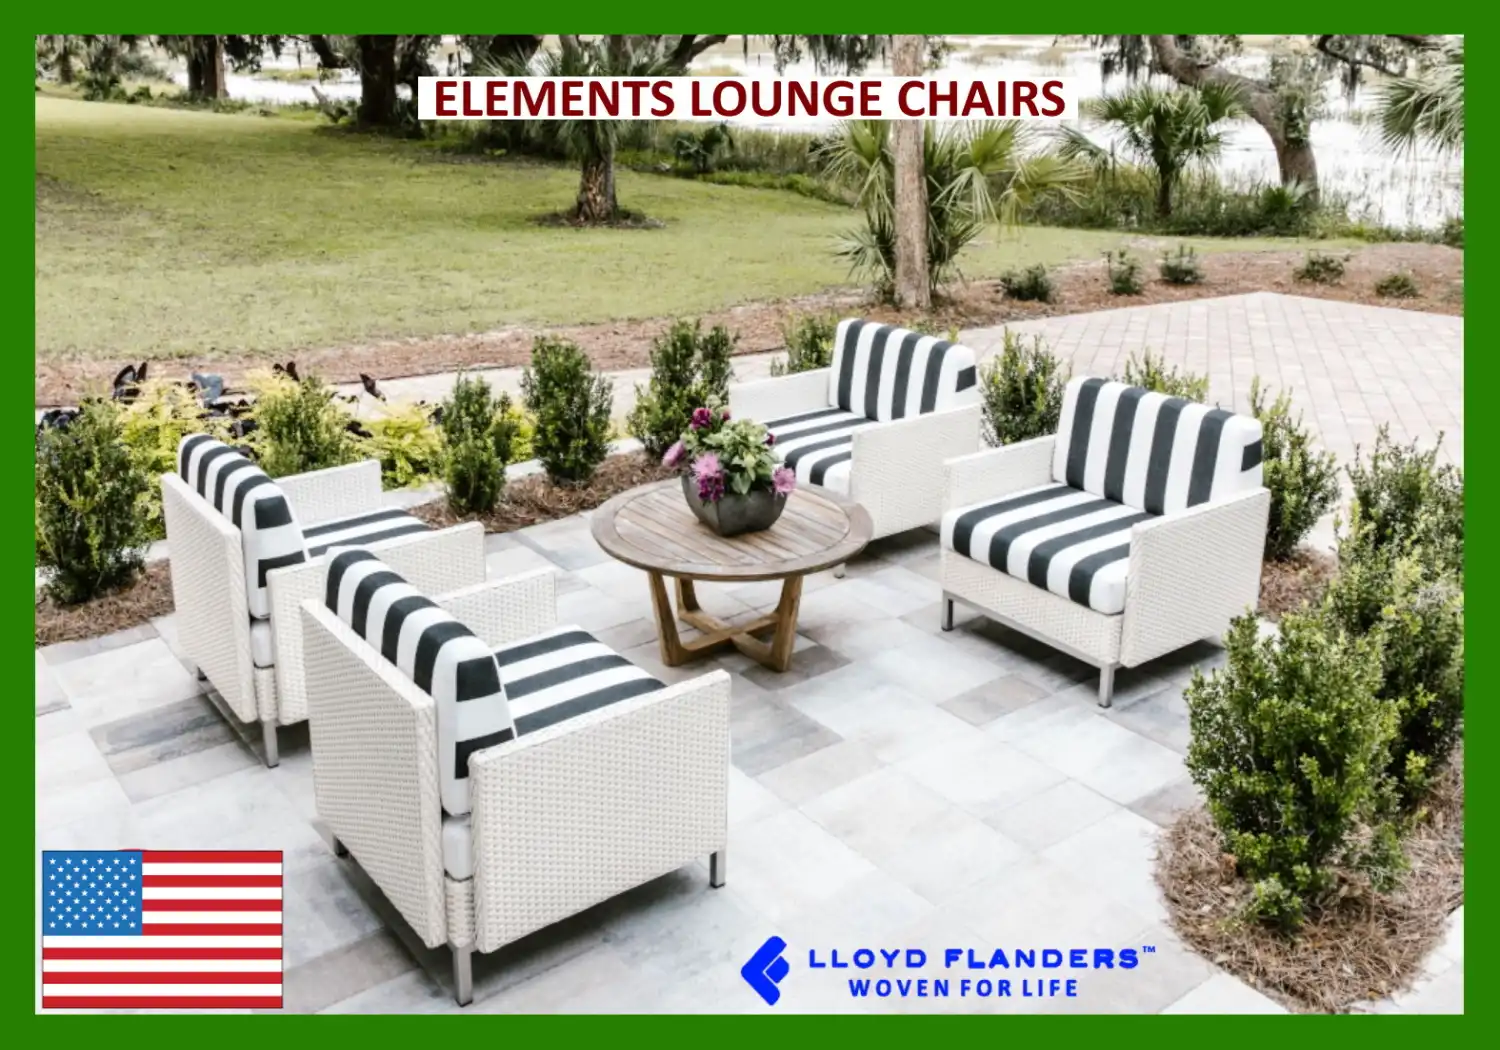 ELEMENTS LOUNGE CHAIRS